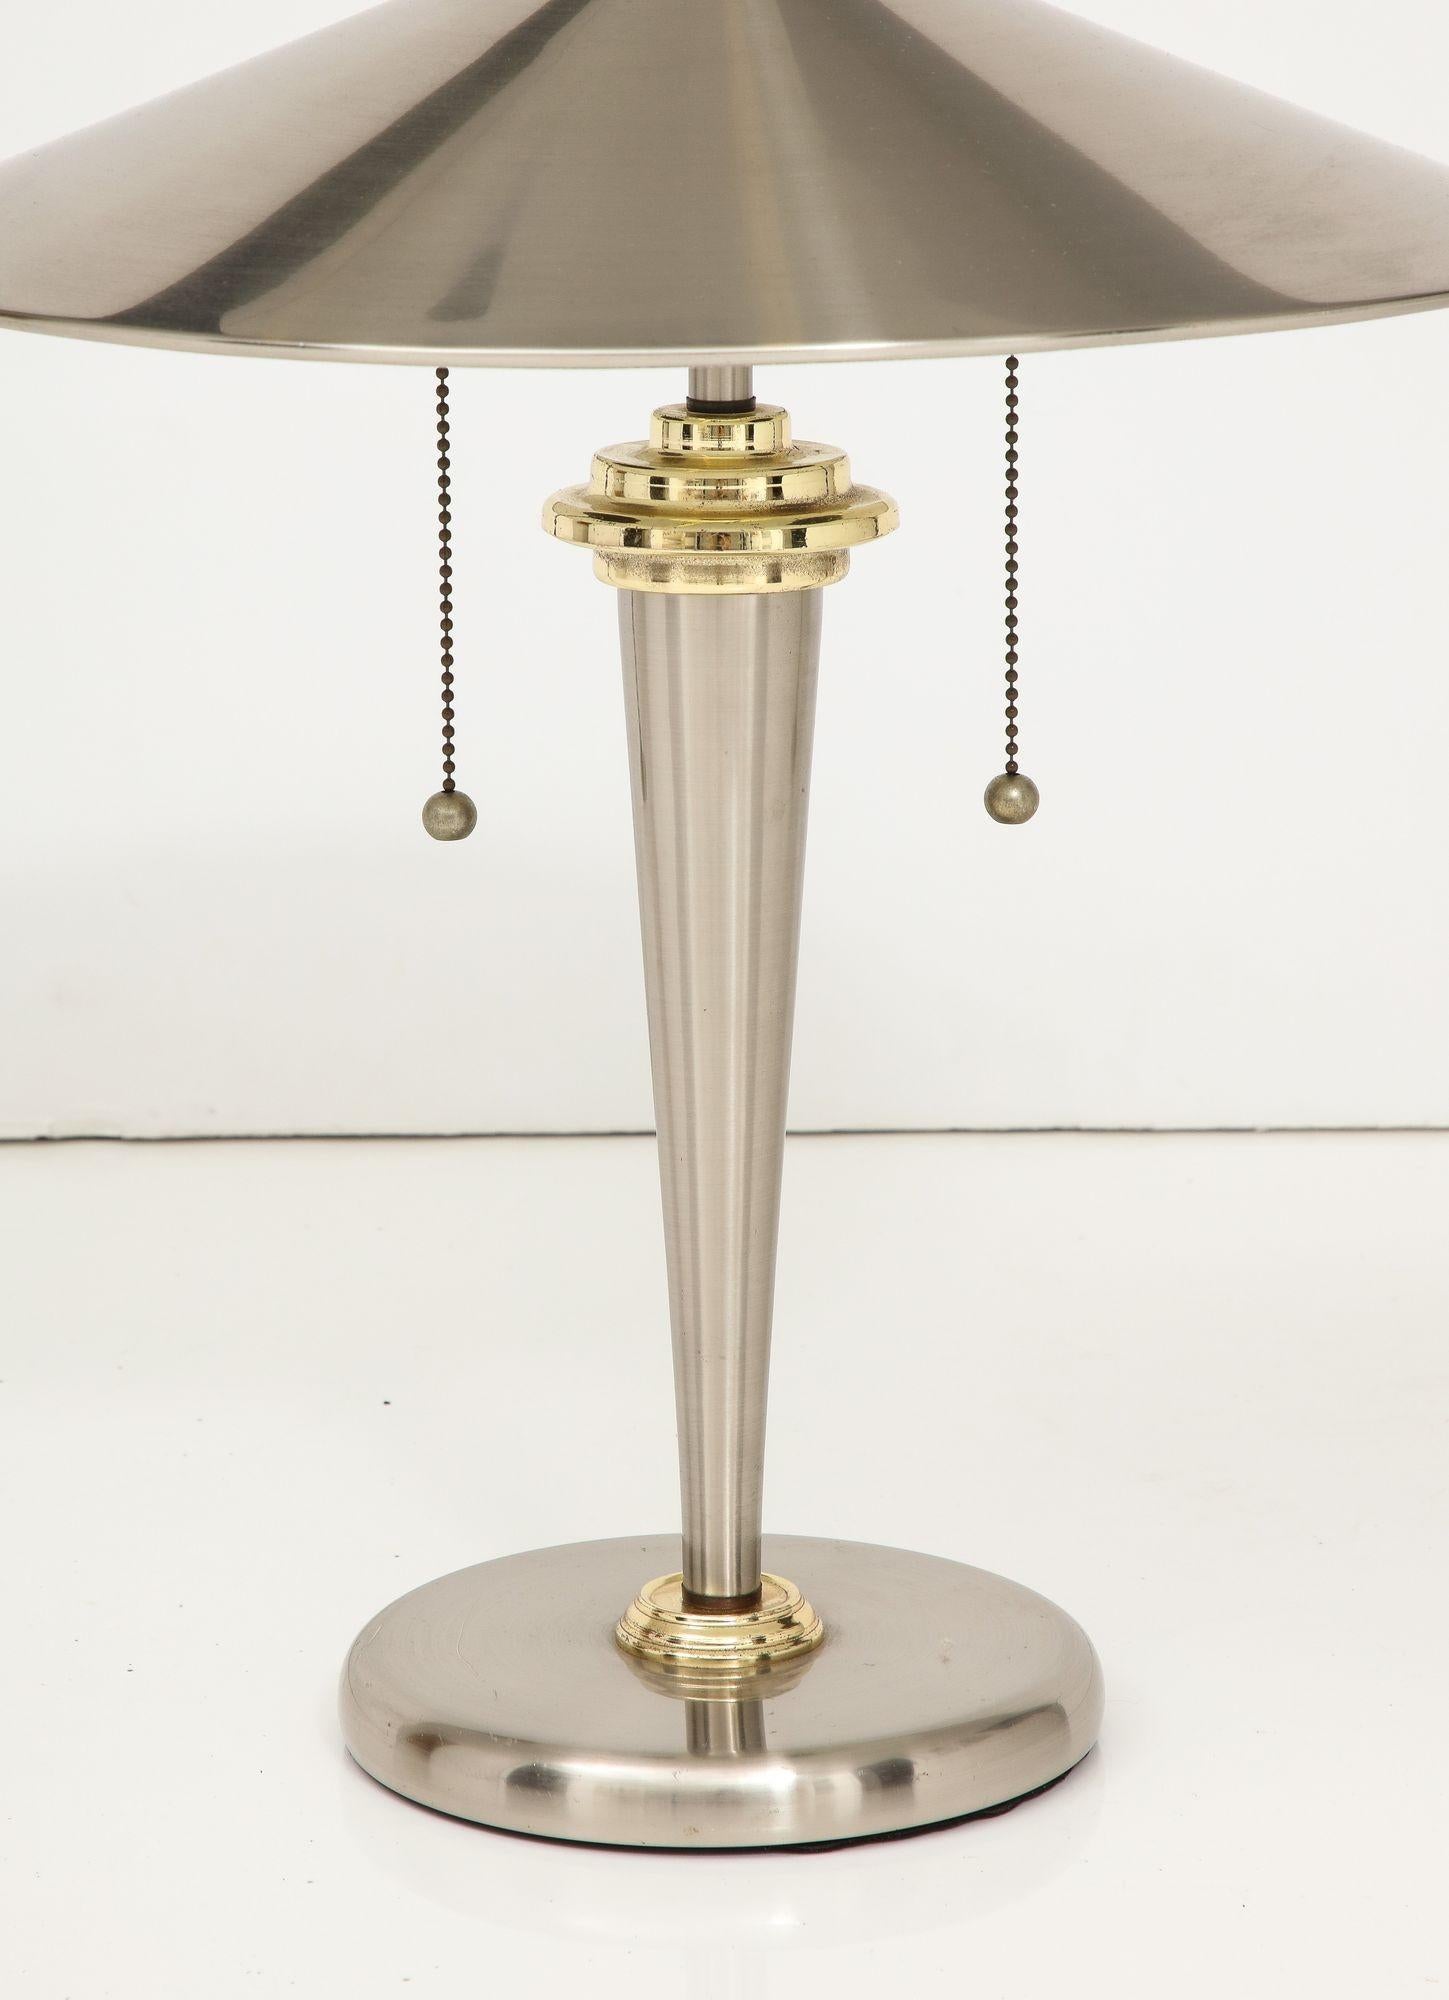 A designer lamp by John Vesey. A stylish nickel plated design and shade with brass accents. . Two lights  with original pulls.